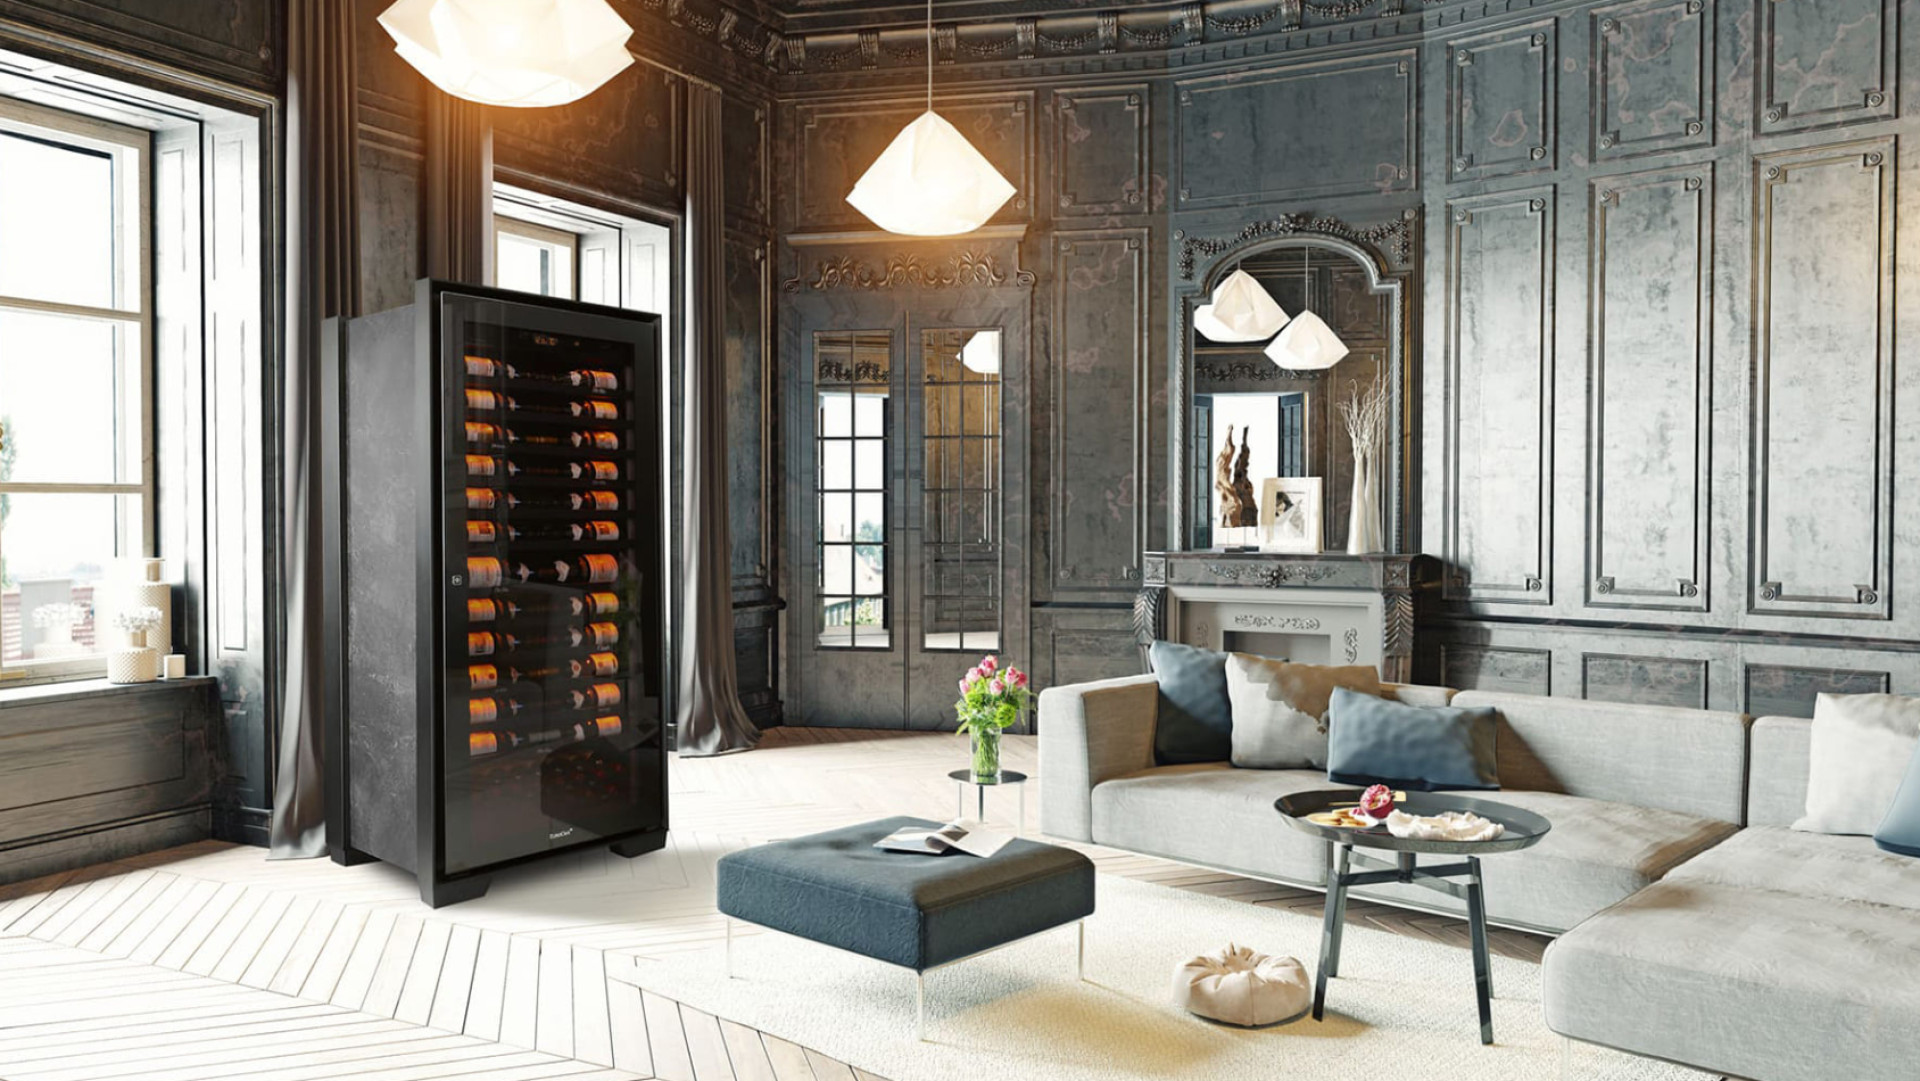 Photo of an upscale wine cabinet in a luxurious Hausmanian living room with an antique marble fireplace and herringbone parquet flooring. - EuroCave Royal Collection